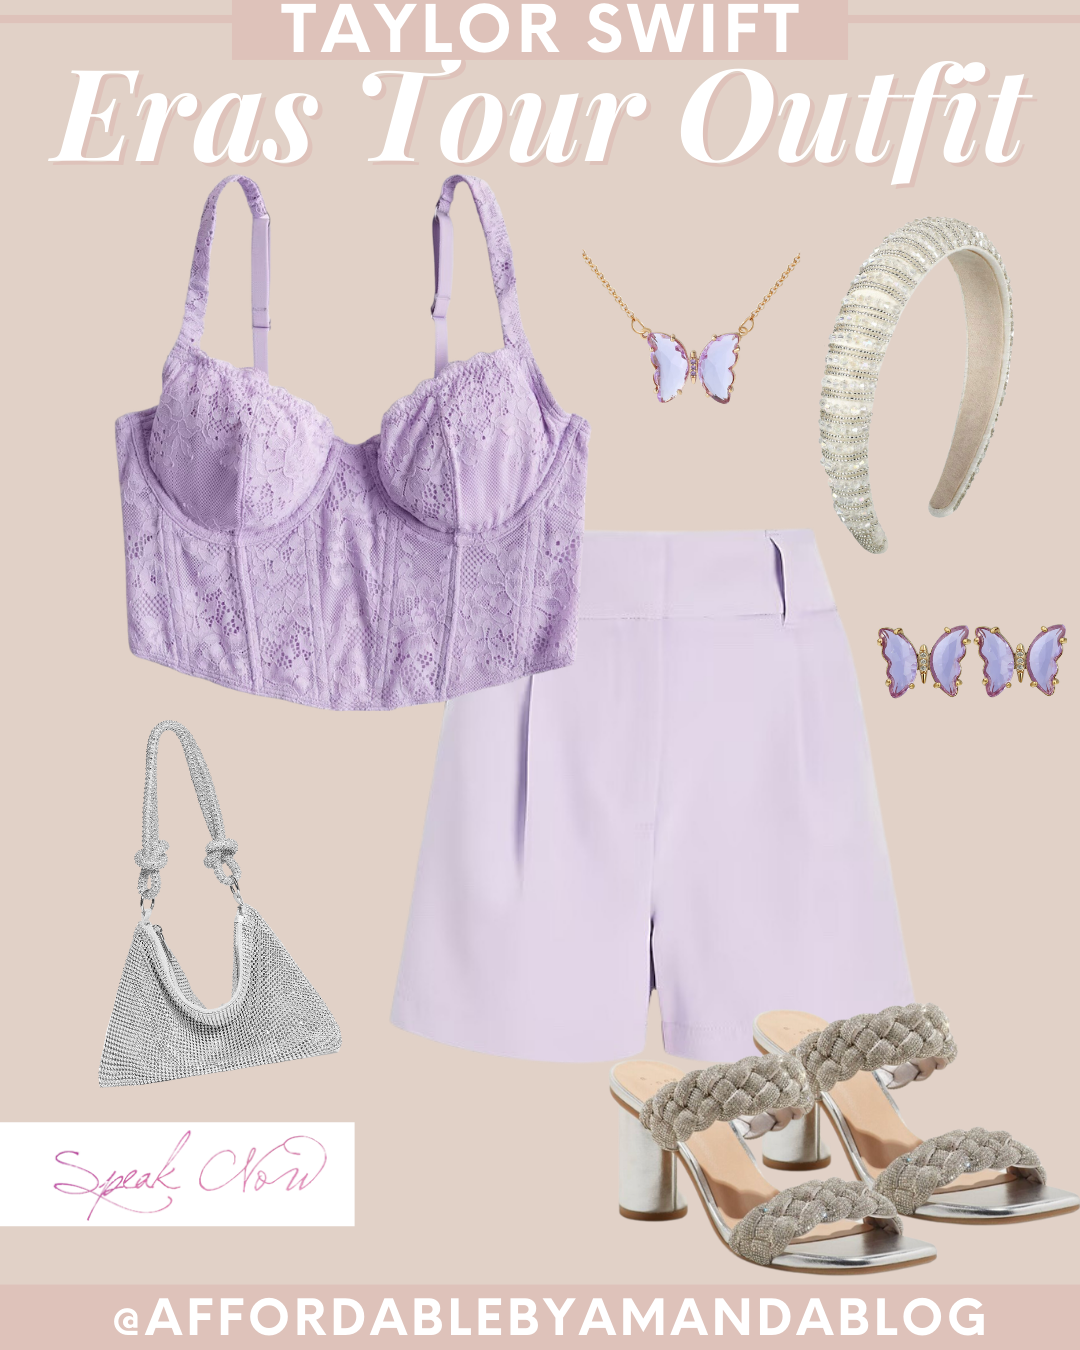 Taylor Swift Concert Outfit Ideas - Taylor Swift Speak Now Era Outfit